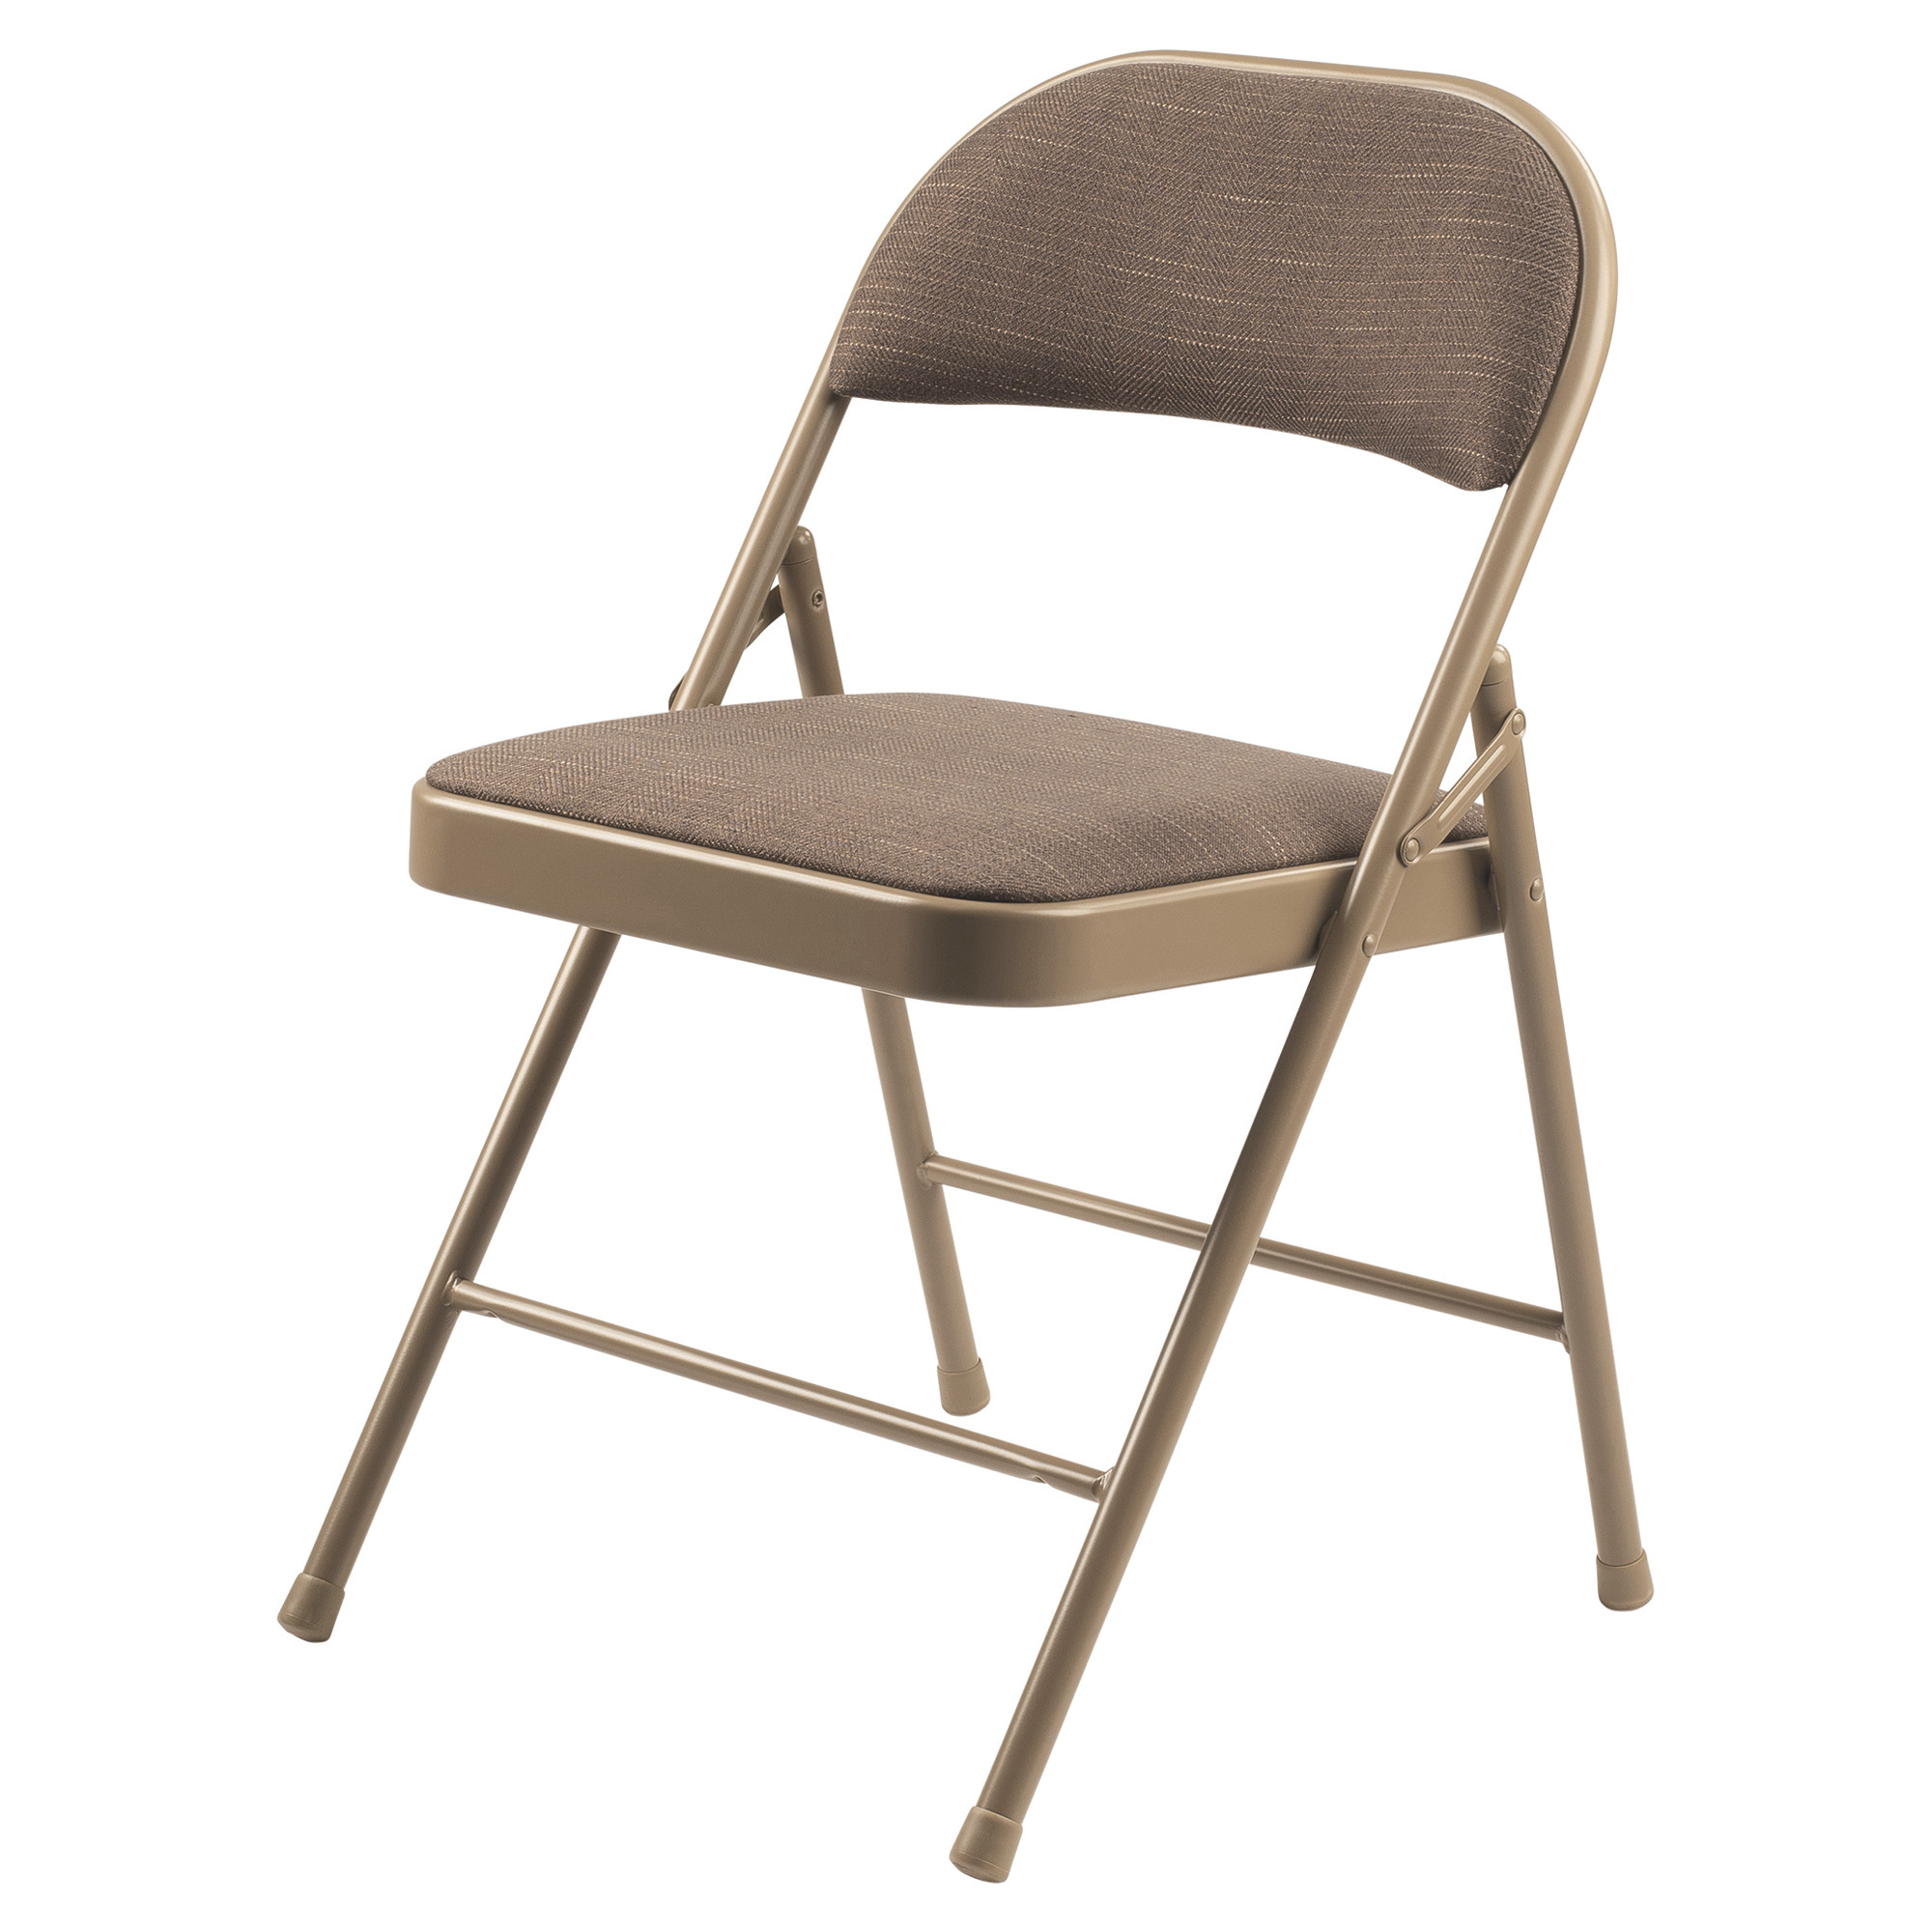 Fabric Padded Folding Chairs — 4-Pack, Brown, Model - National Public Seating 973